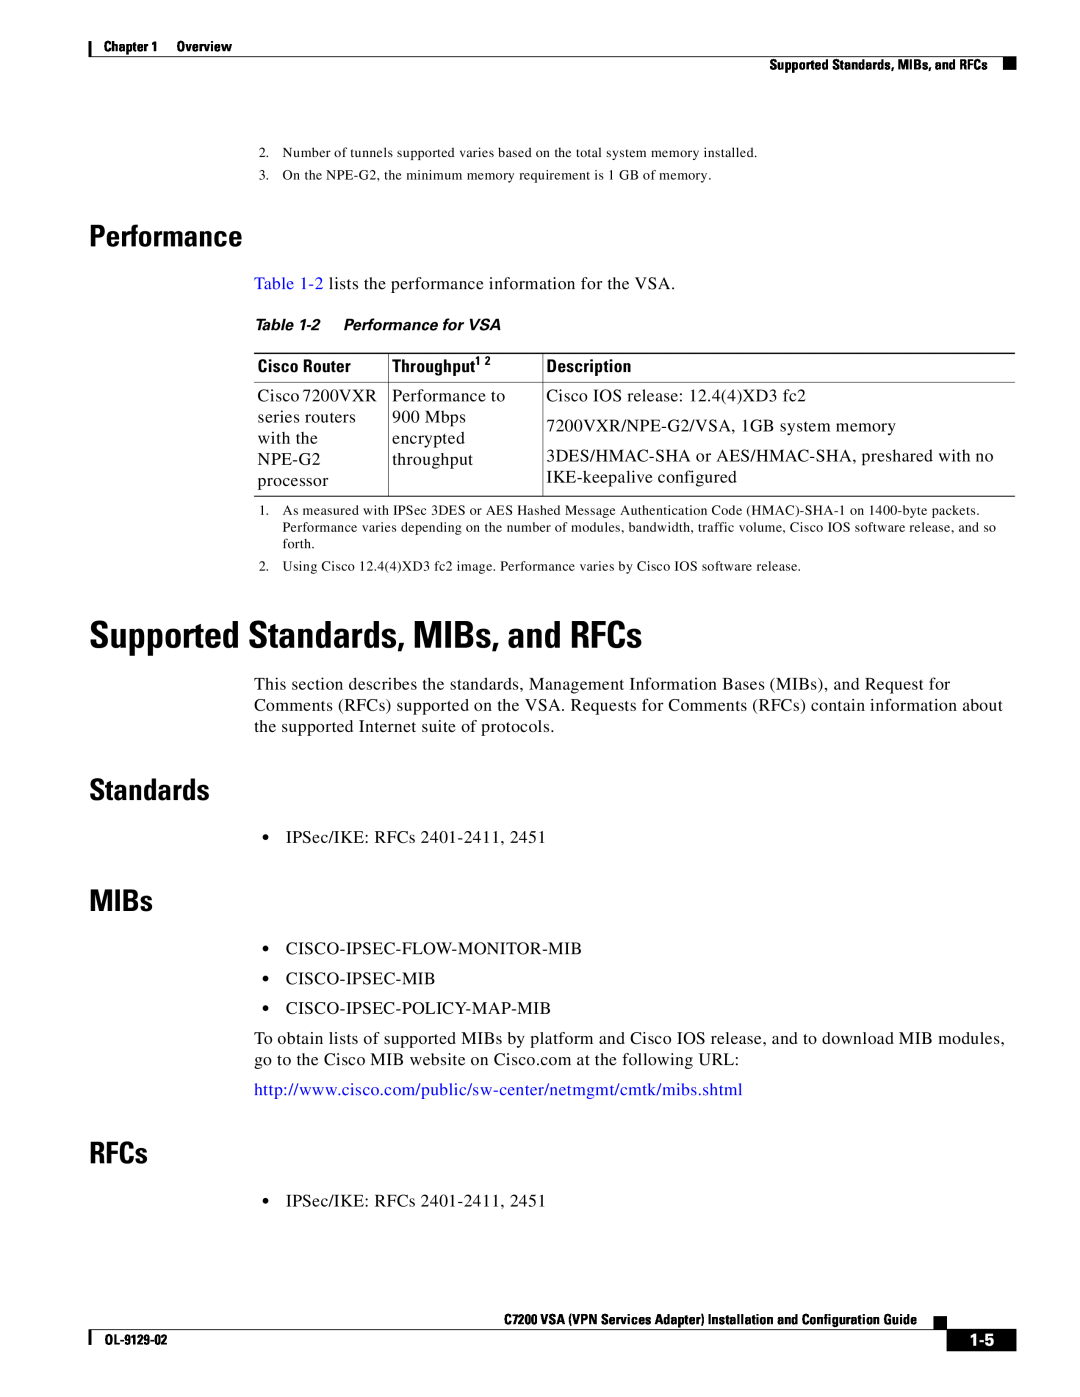 Cisco Systems C7200 manual Supported Standards, MIBs, and RFCs, Performance 